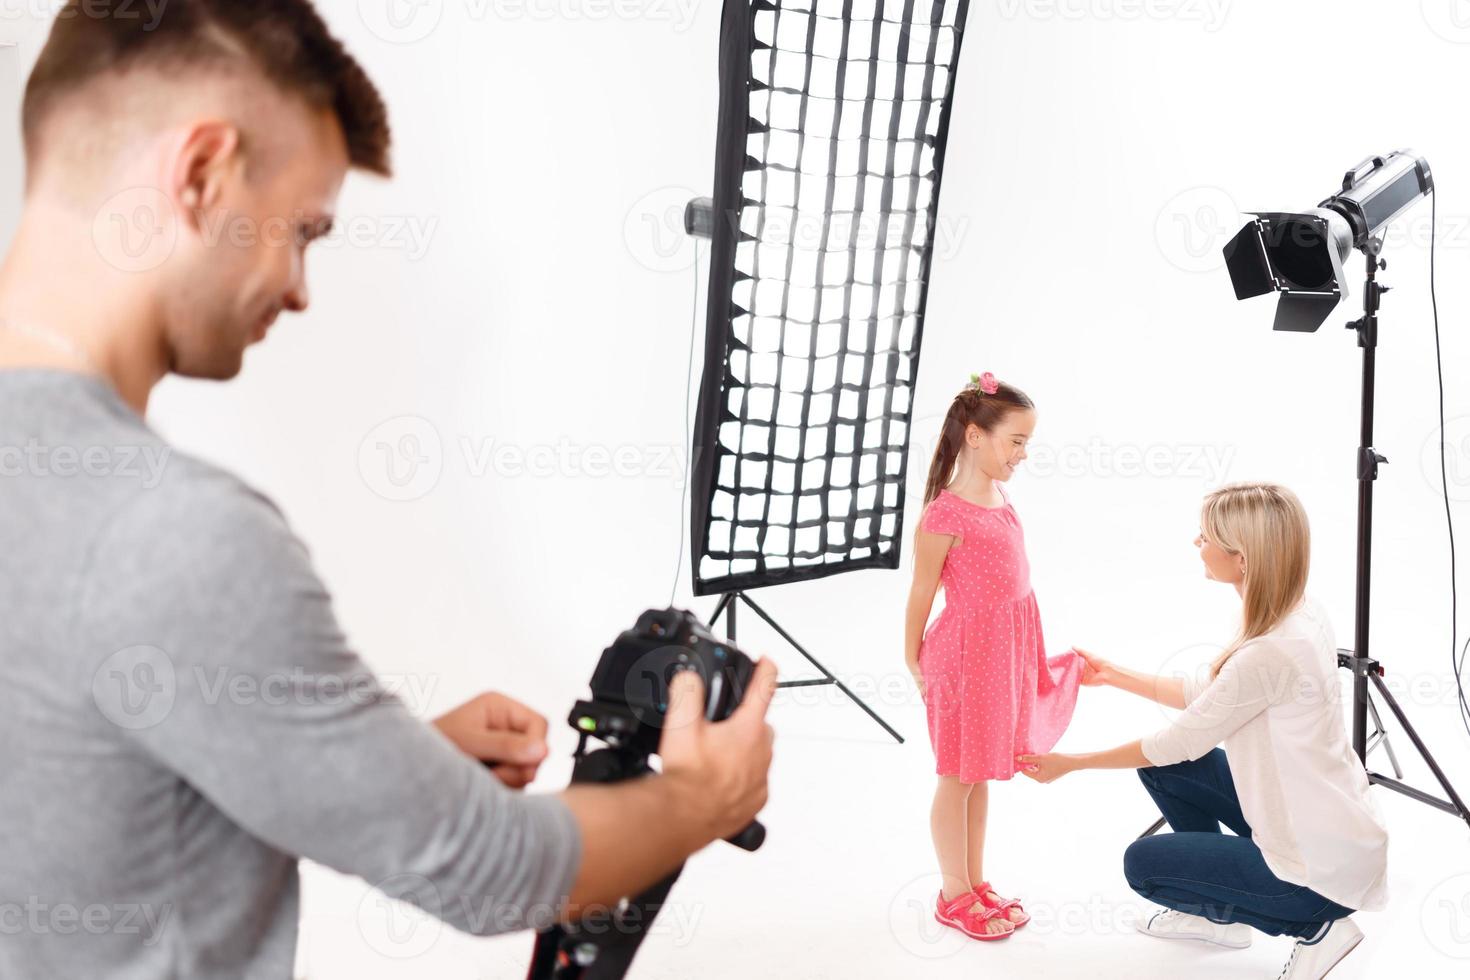 Photographer checks his camera while model is being prepared photo